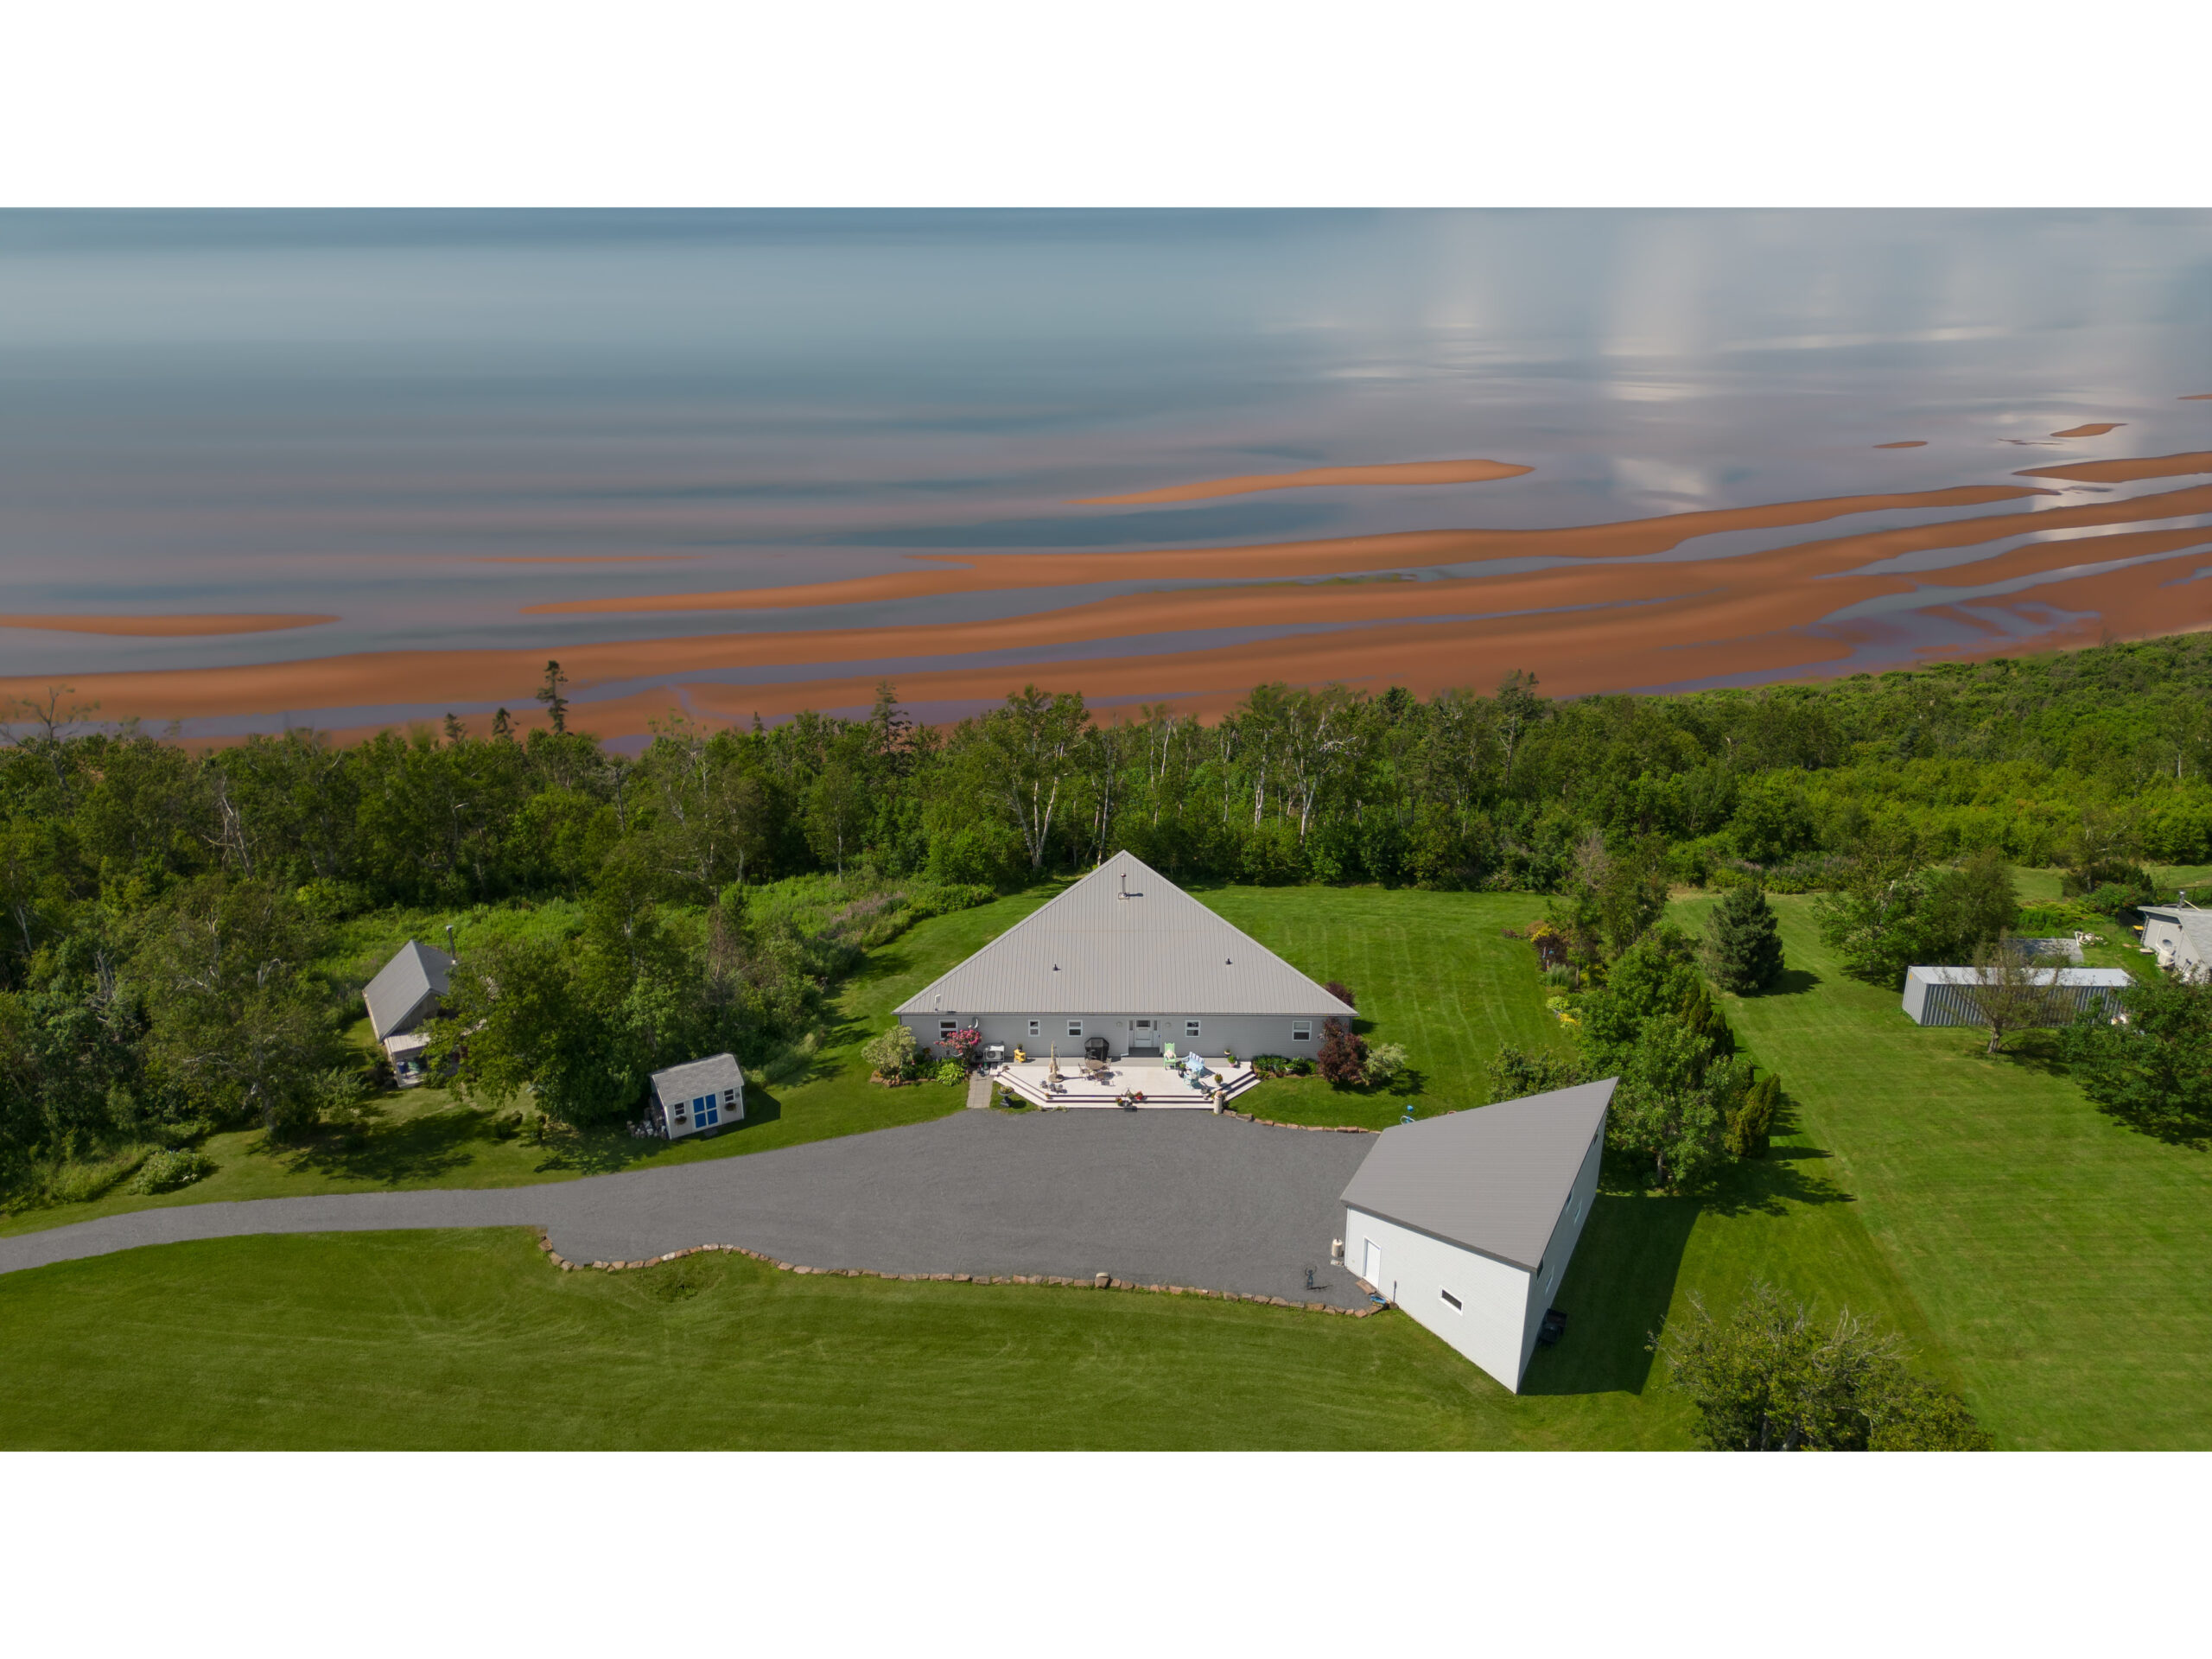 A large waterfront Prince Edward Island home surrounded by green trees, looking out to a red sand beach and a big stretch of water.